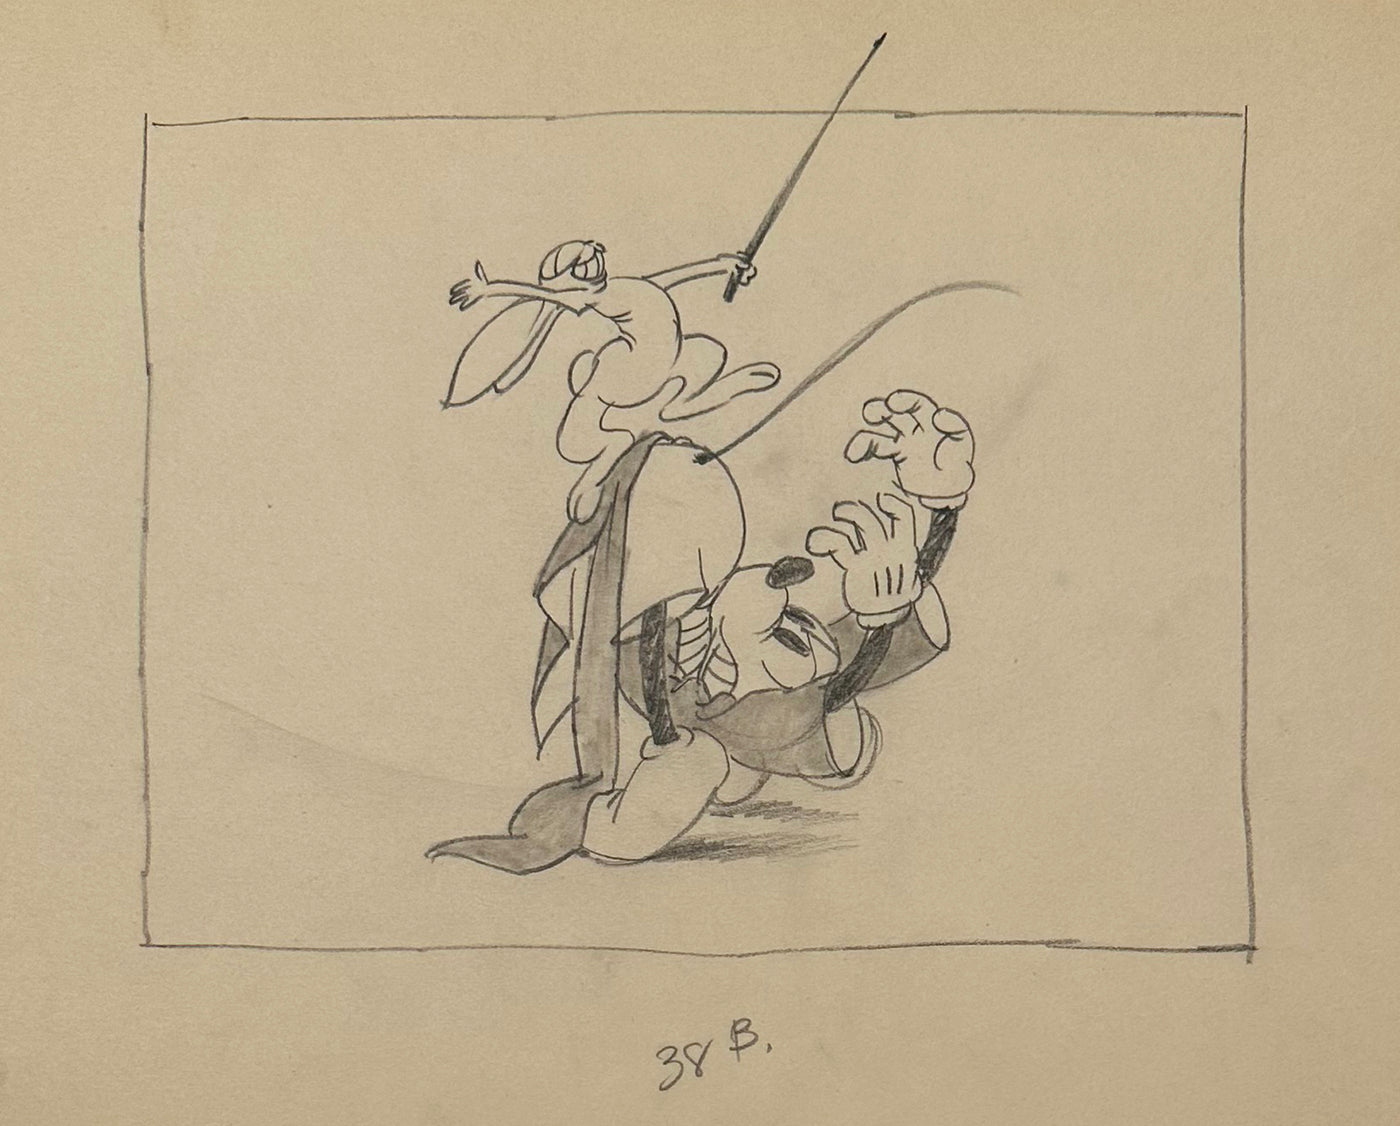 Original Walt Disney Production Drawing from Mickey's Grand Opera featuring Mickey Mouse